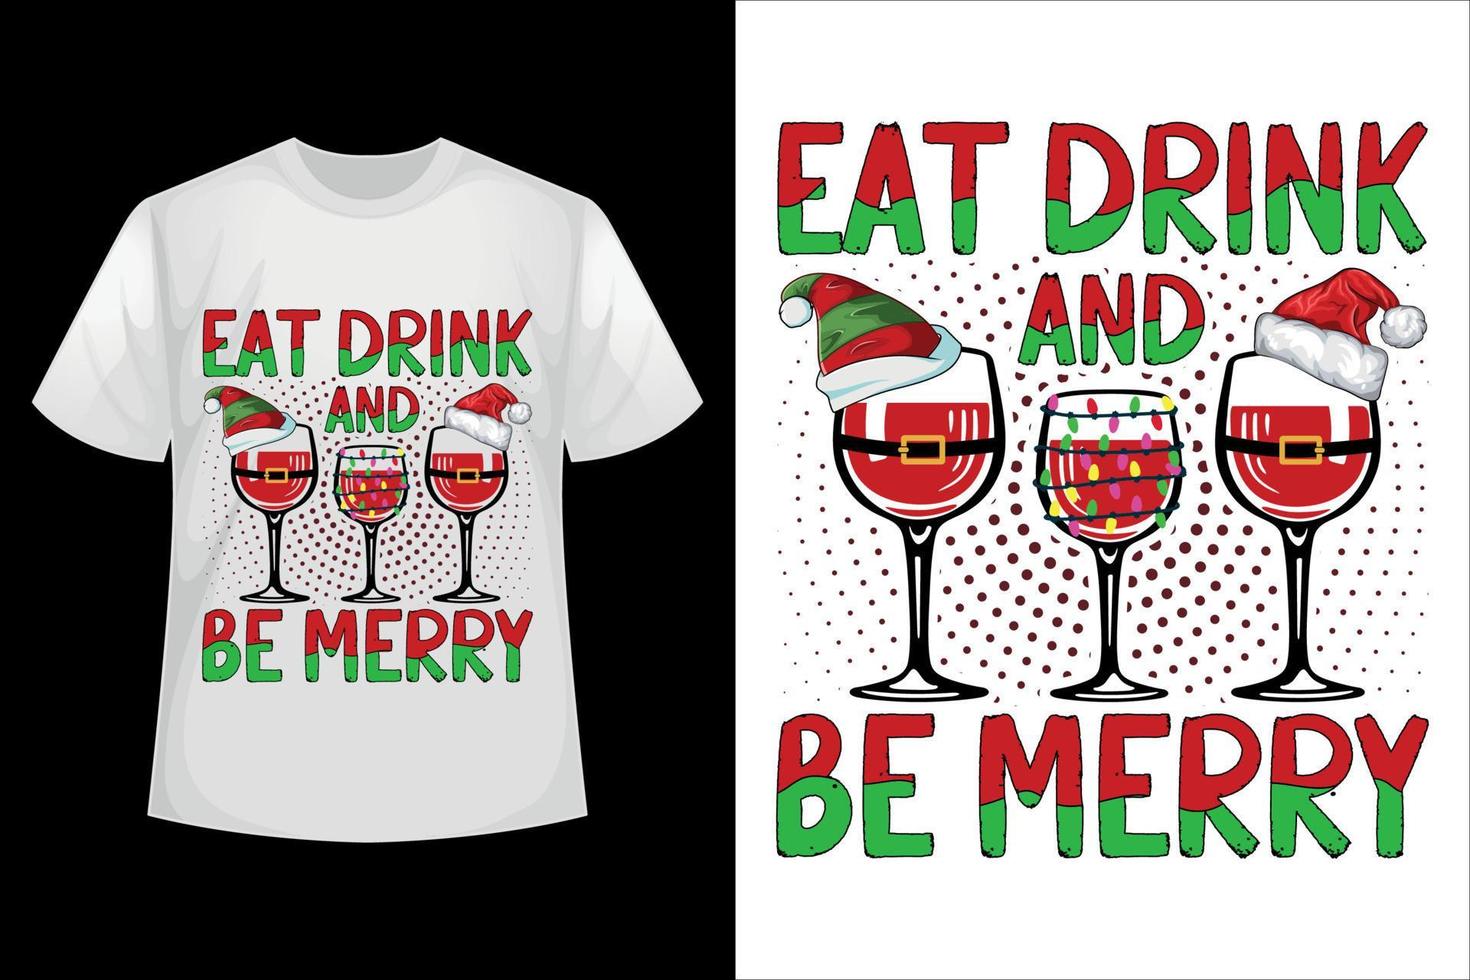 Eat drink and be merry - Christmas t-shirt design template vector